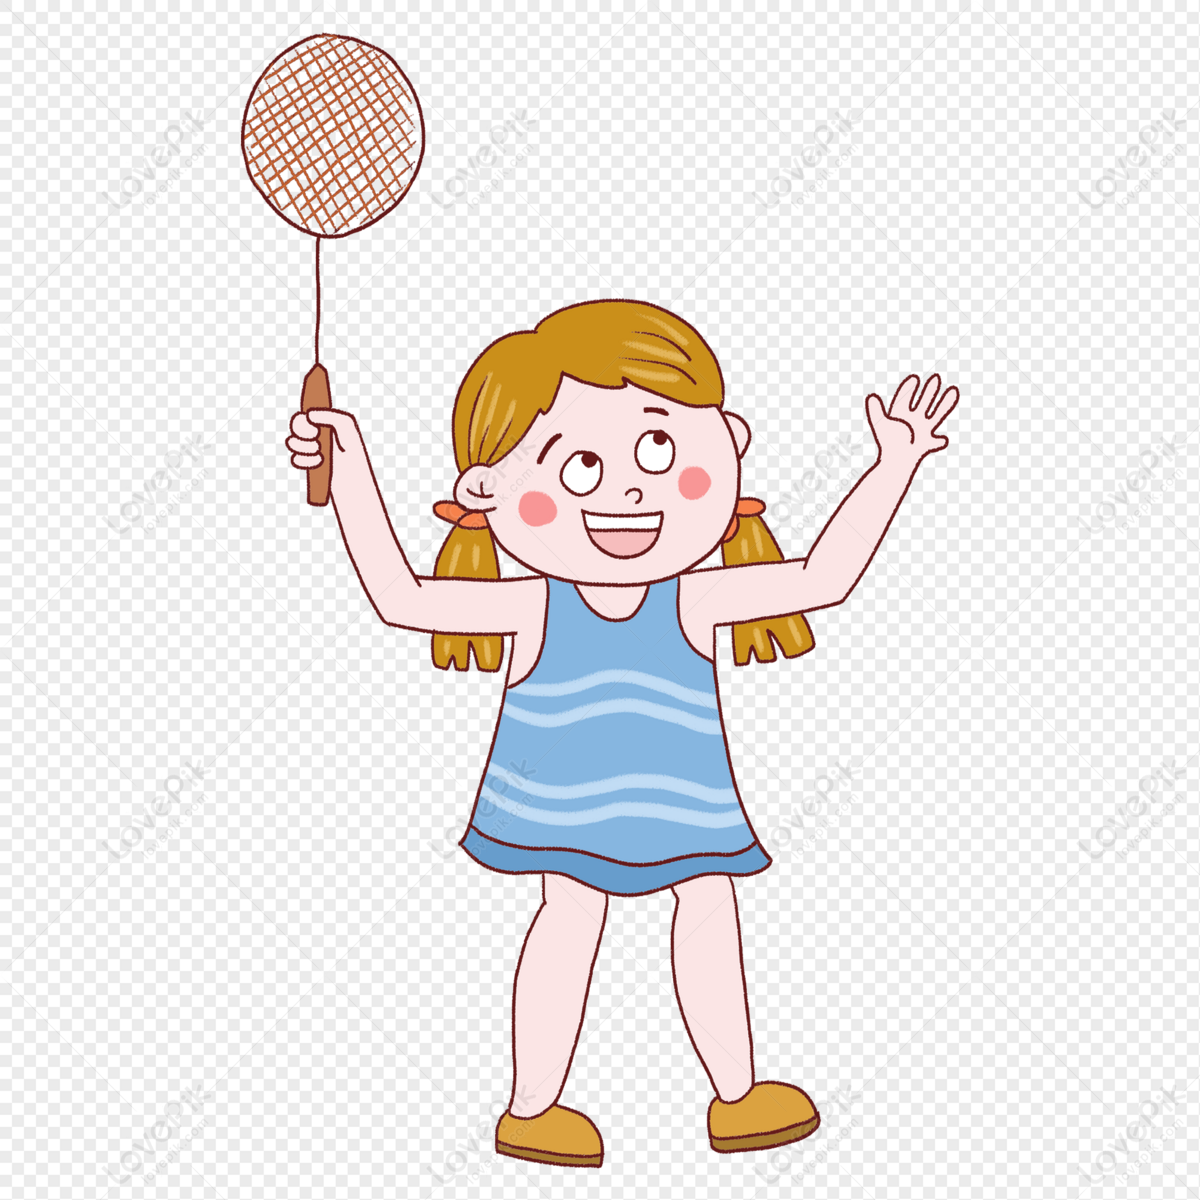 Girl Playing Badminton PNG Image Free Download And Clipart Image For Free  Download - Lovepik | 401360161